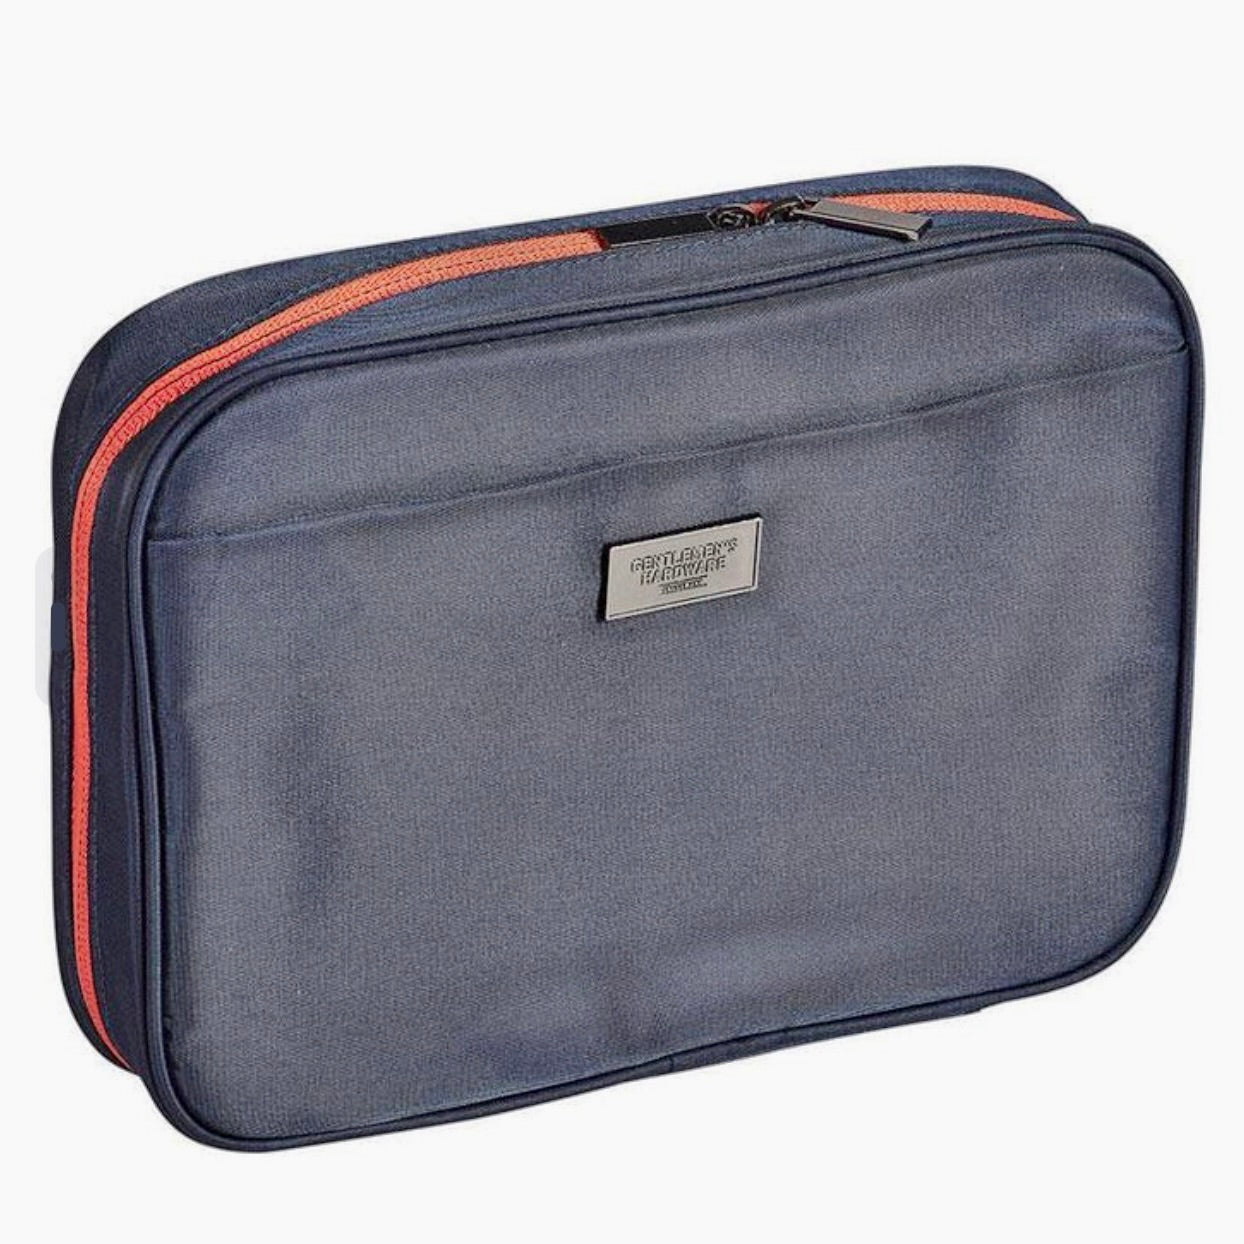 Travel Case with multiple compartments